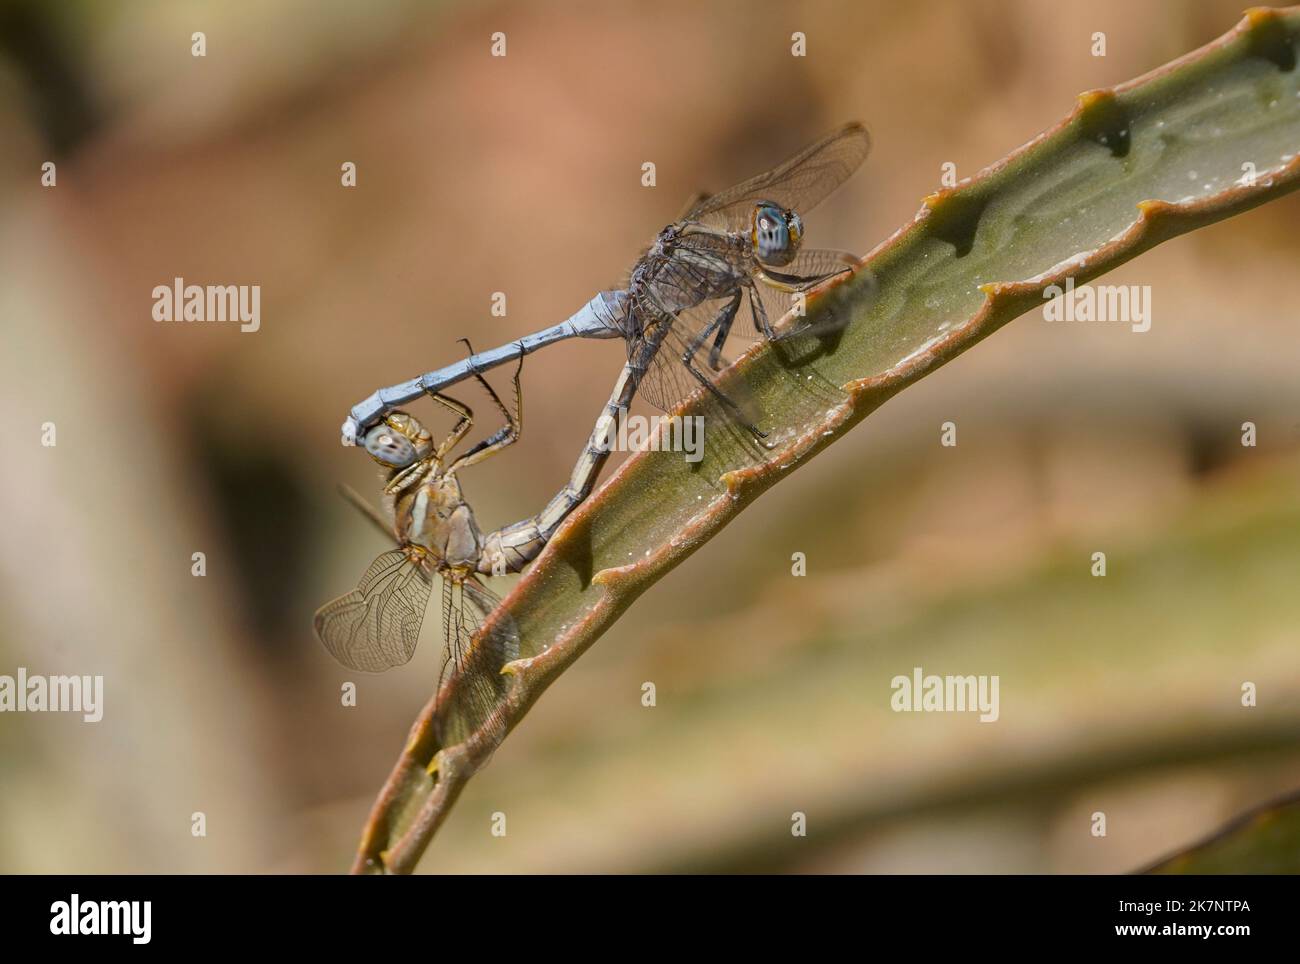 Closeup of an Epaulet skimmers, Orthetrum chrysostigma, dragonflies male and female mating. on leaf, Spain. Stock Photo